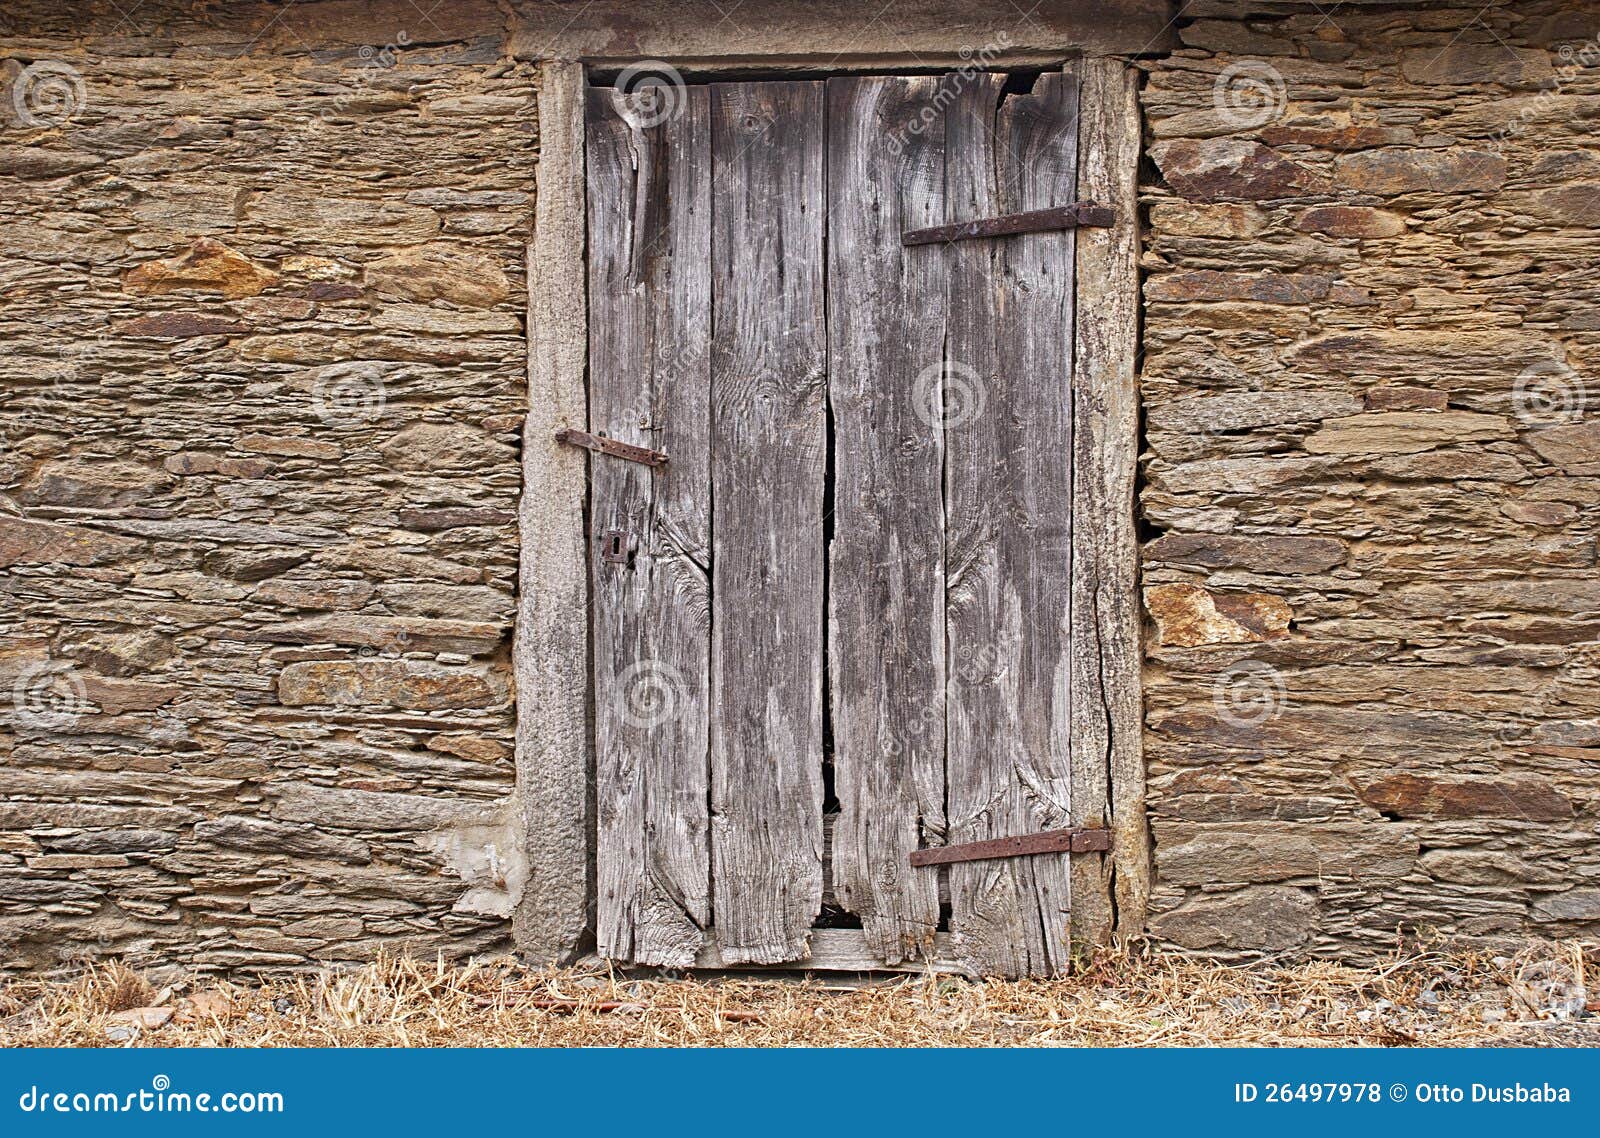 Stone wall with old door stock photo. Image of stones - 26497978